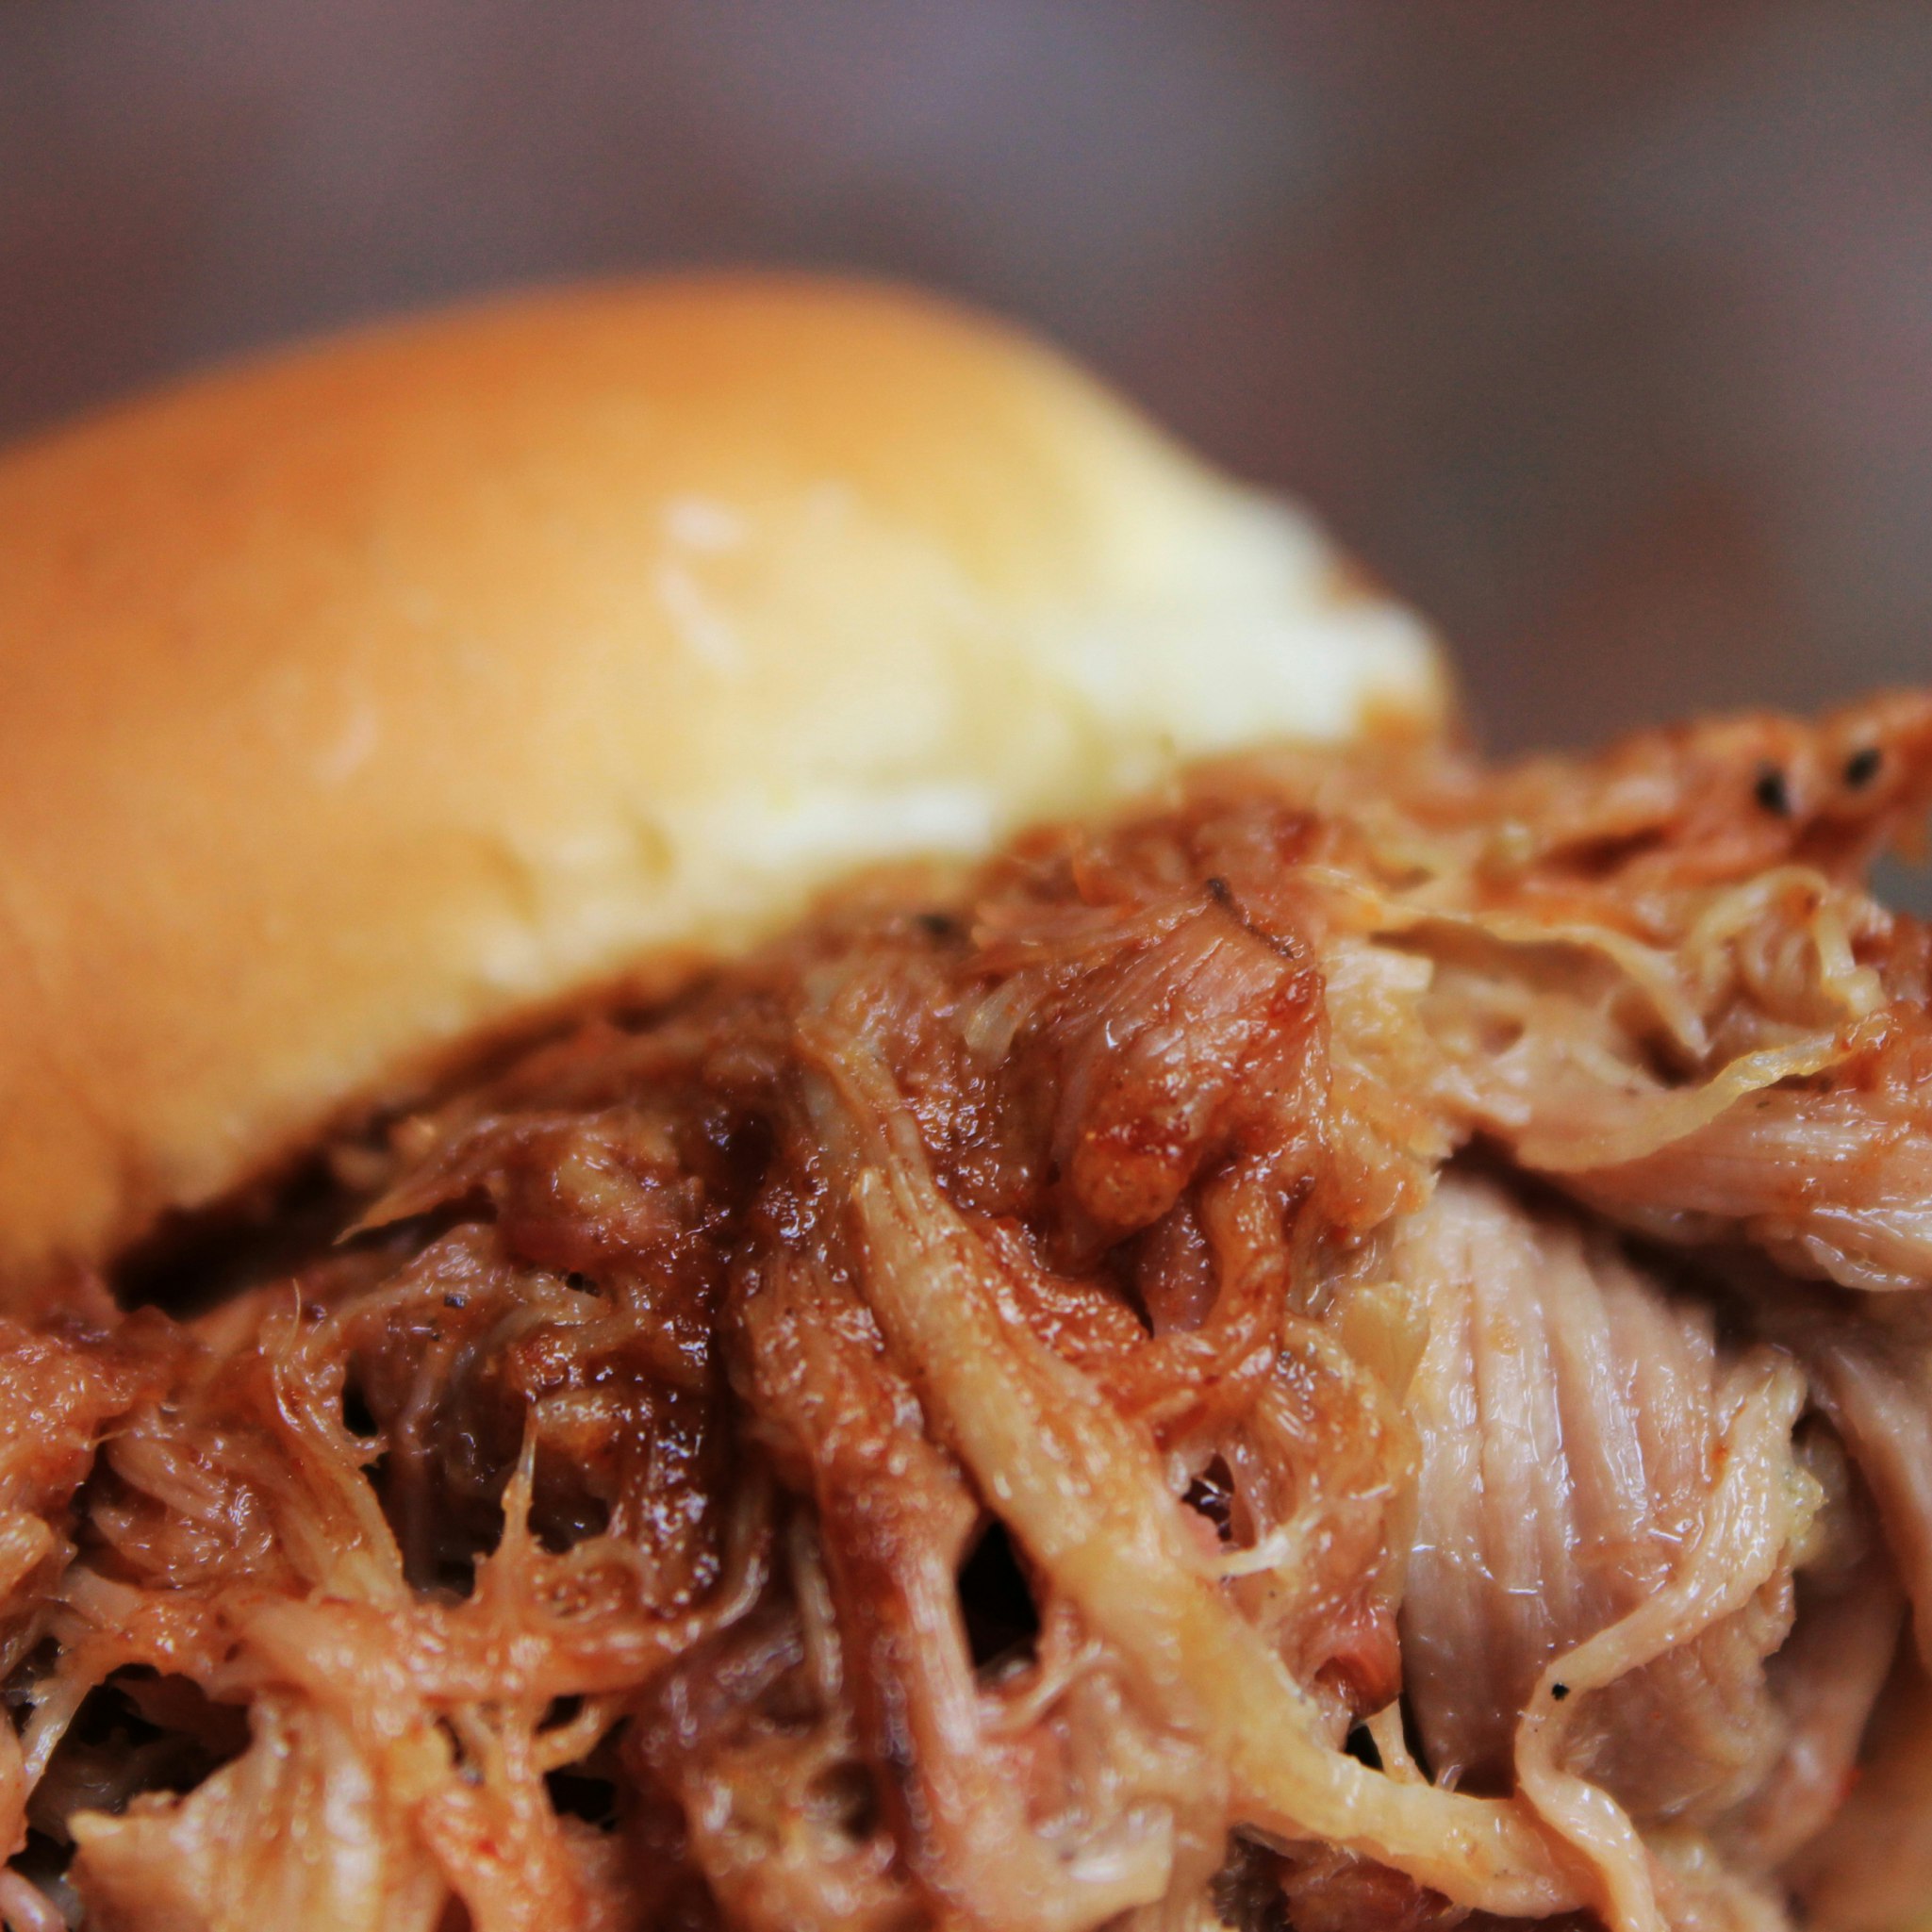 Macro Close Up Barbecue BBQ Pulled Pork Sandwhich; Shutterstock ID 545251645